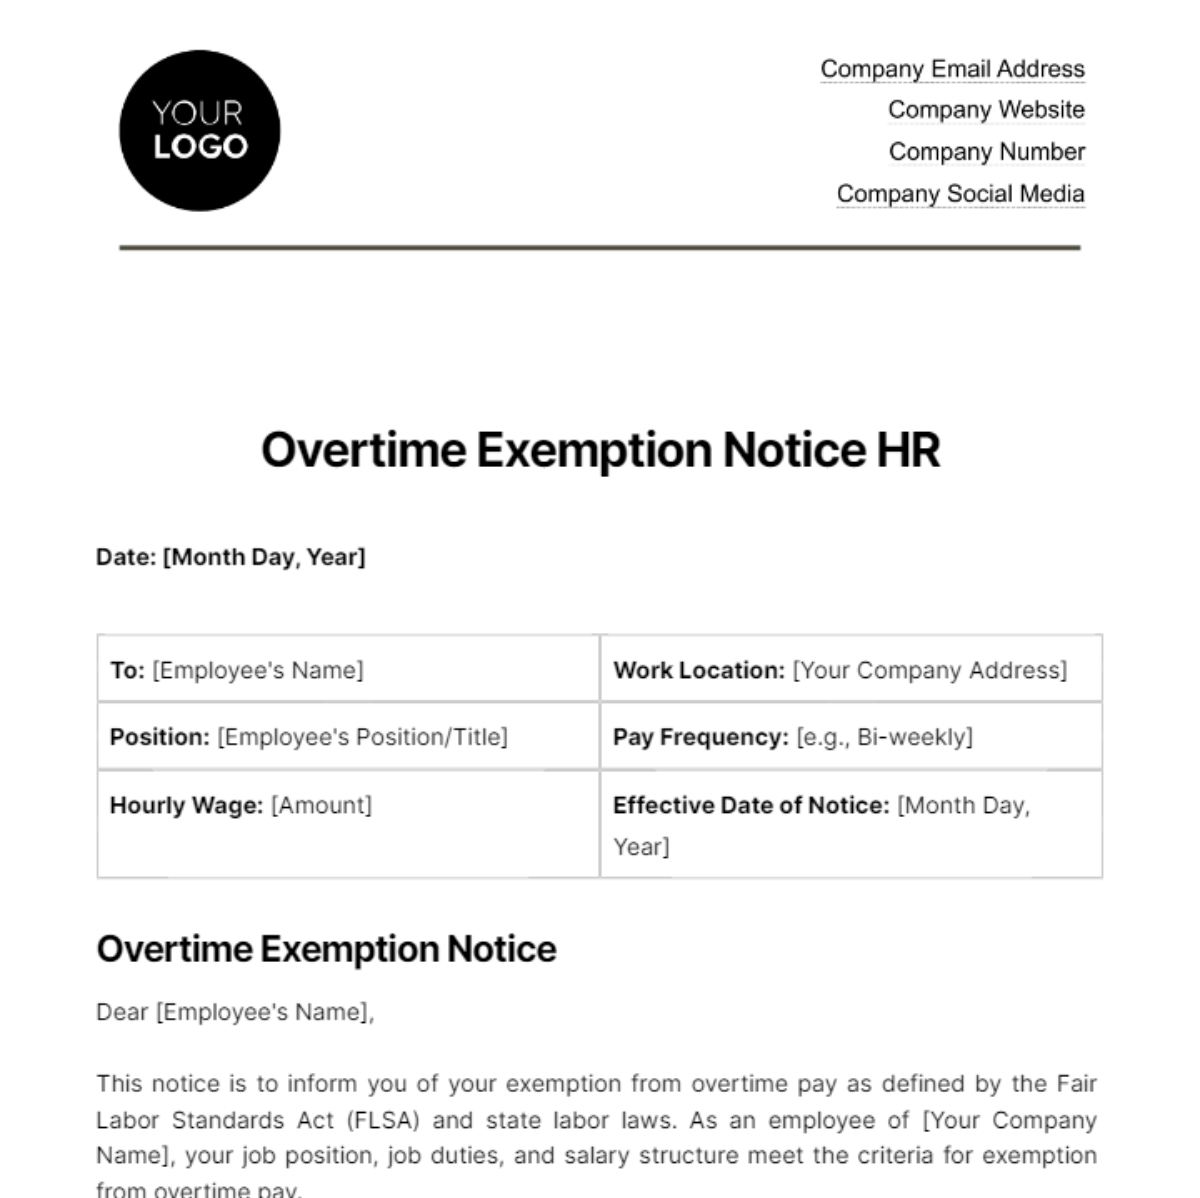 Free Overtime Exemption Notice HR Template